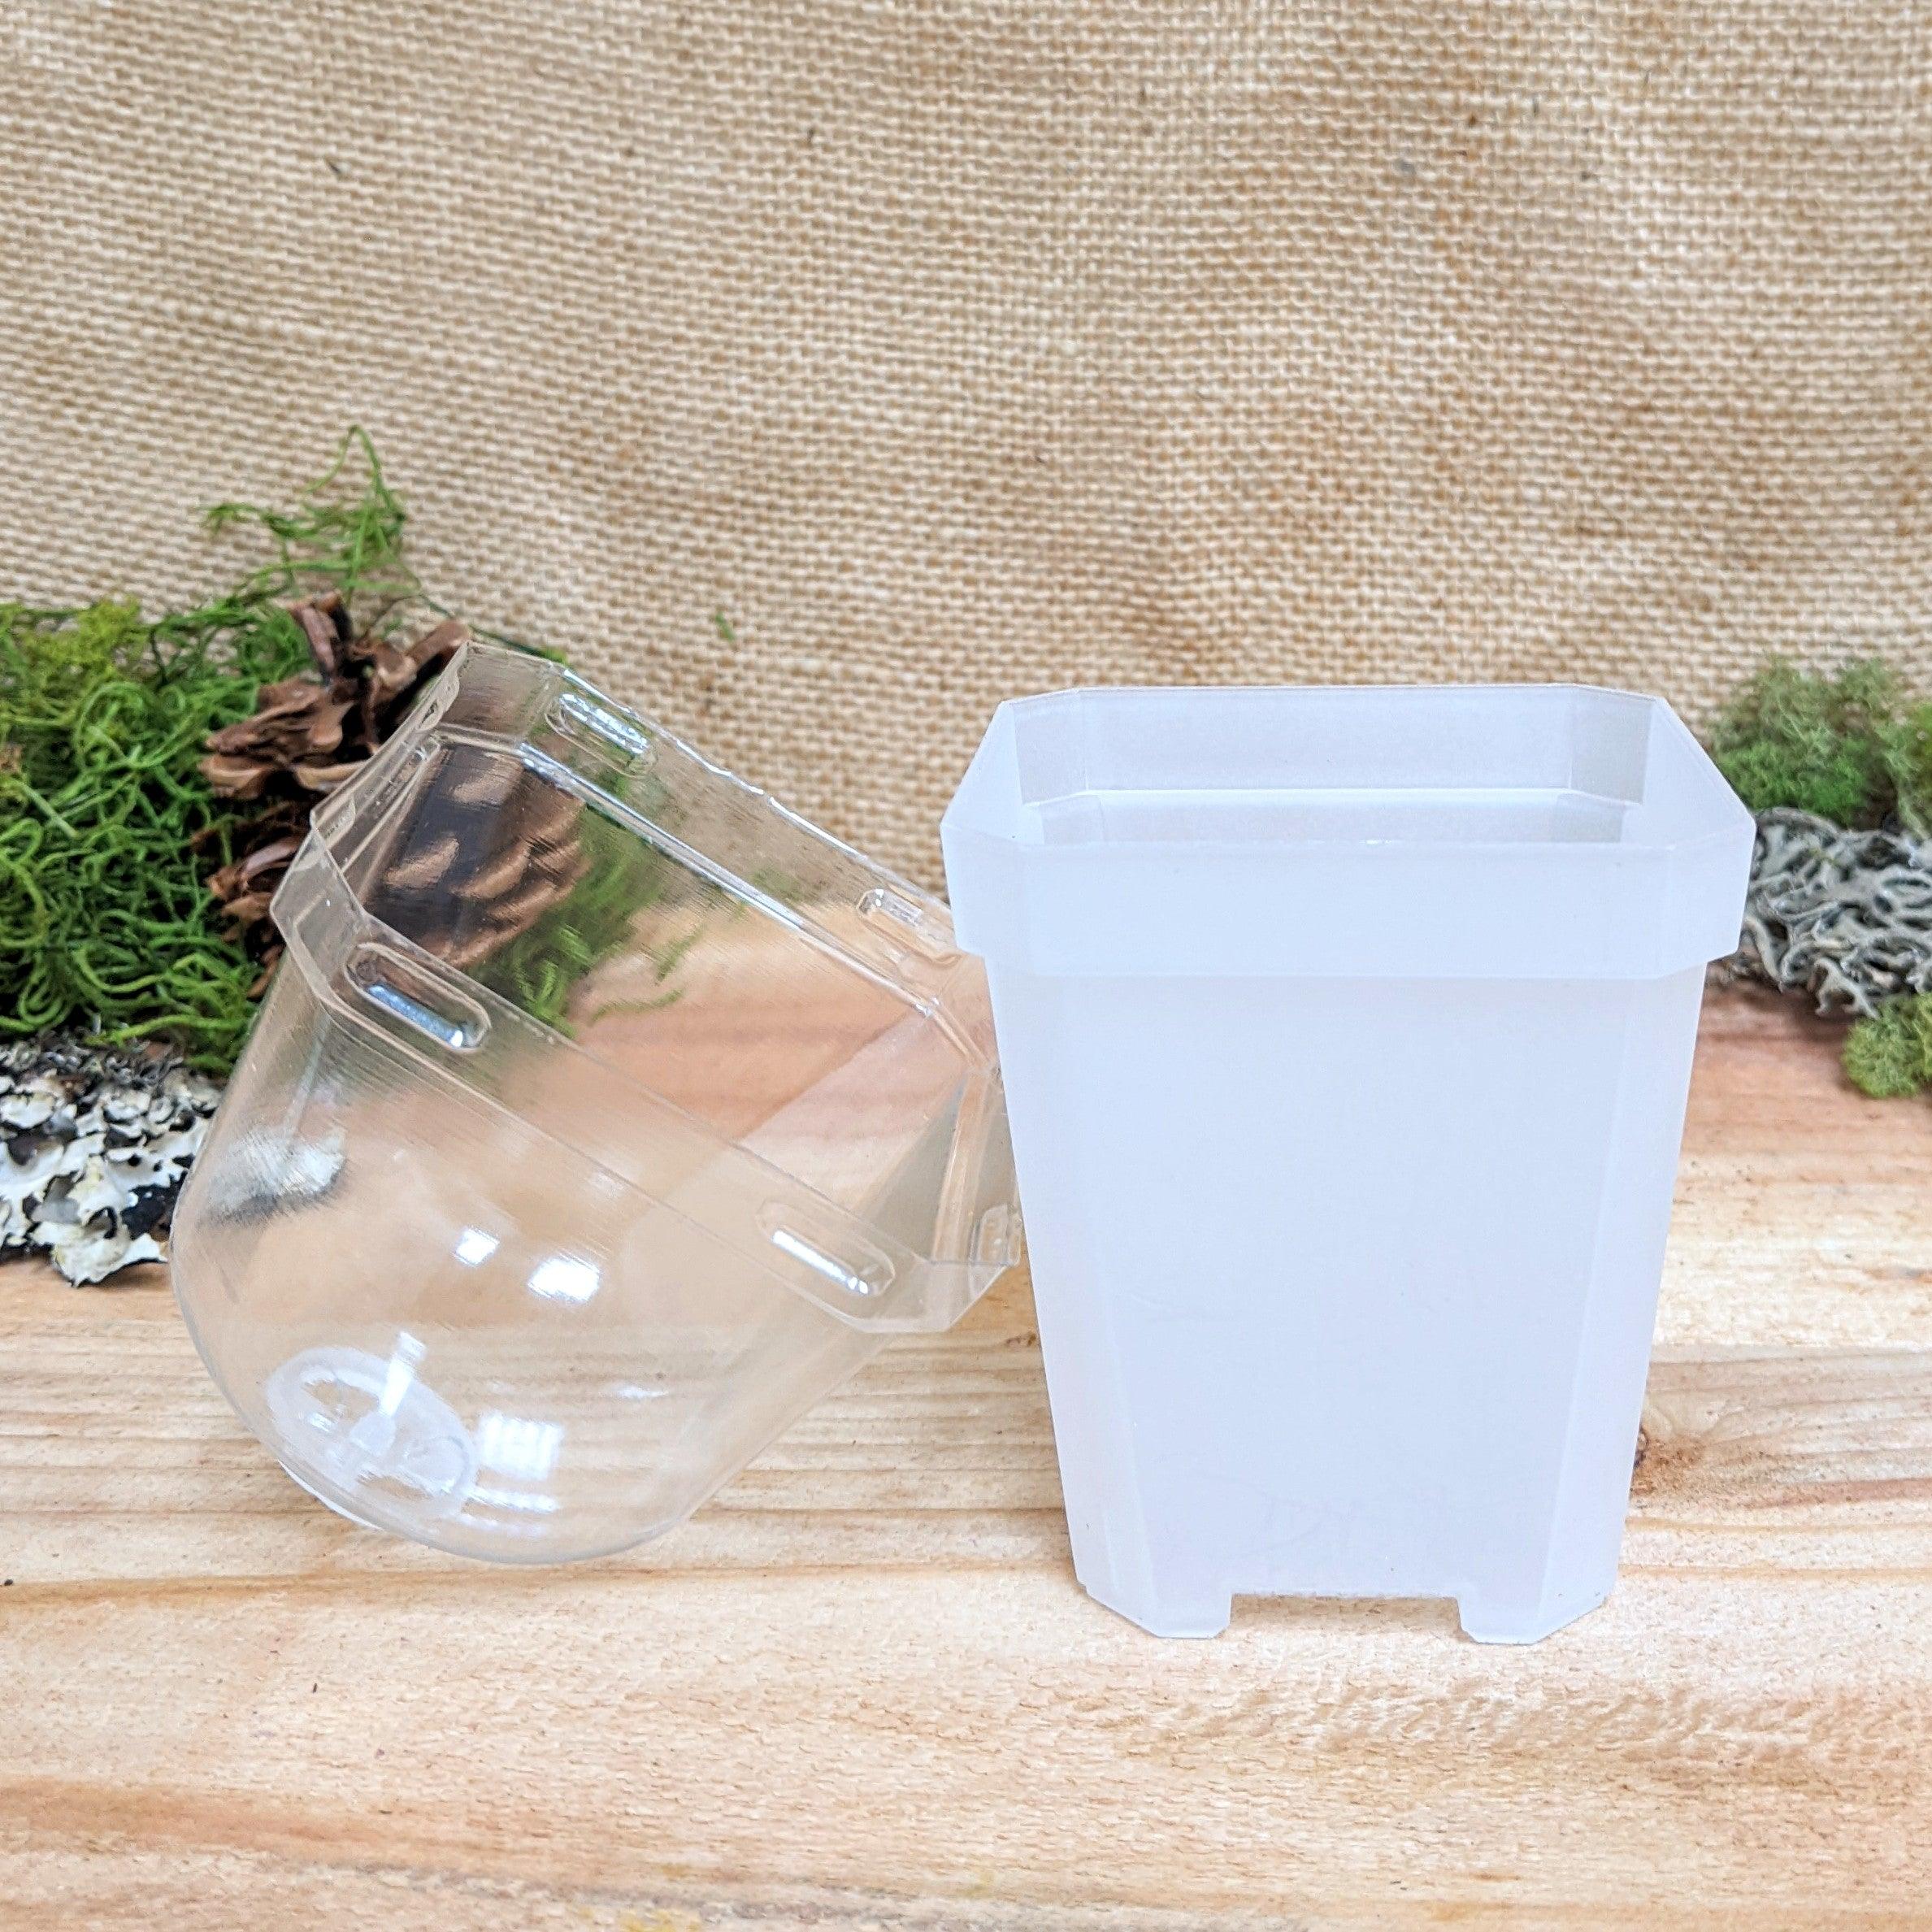 Planter with Humidity Dome - Plantflix